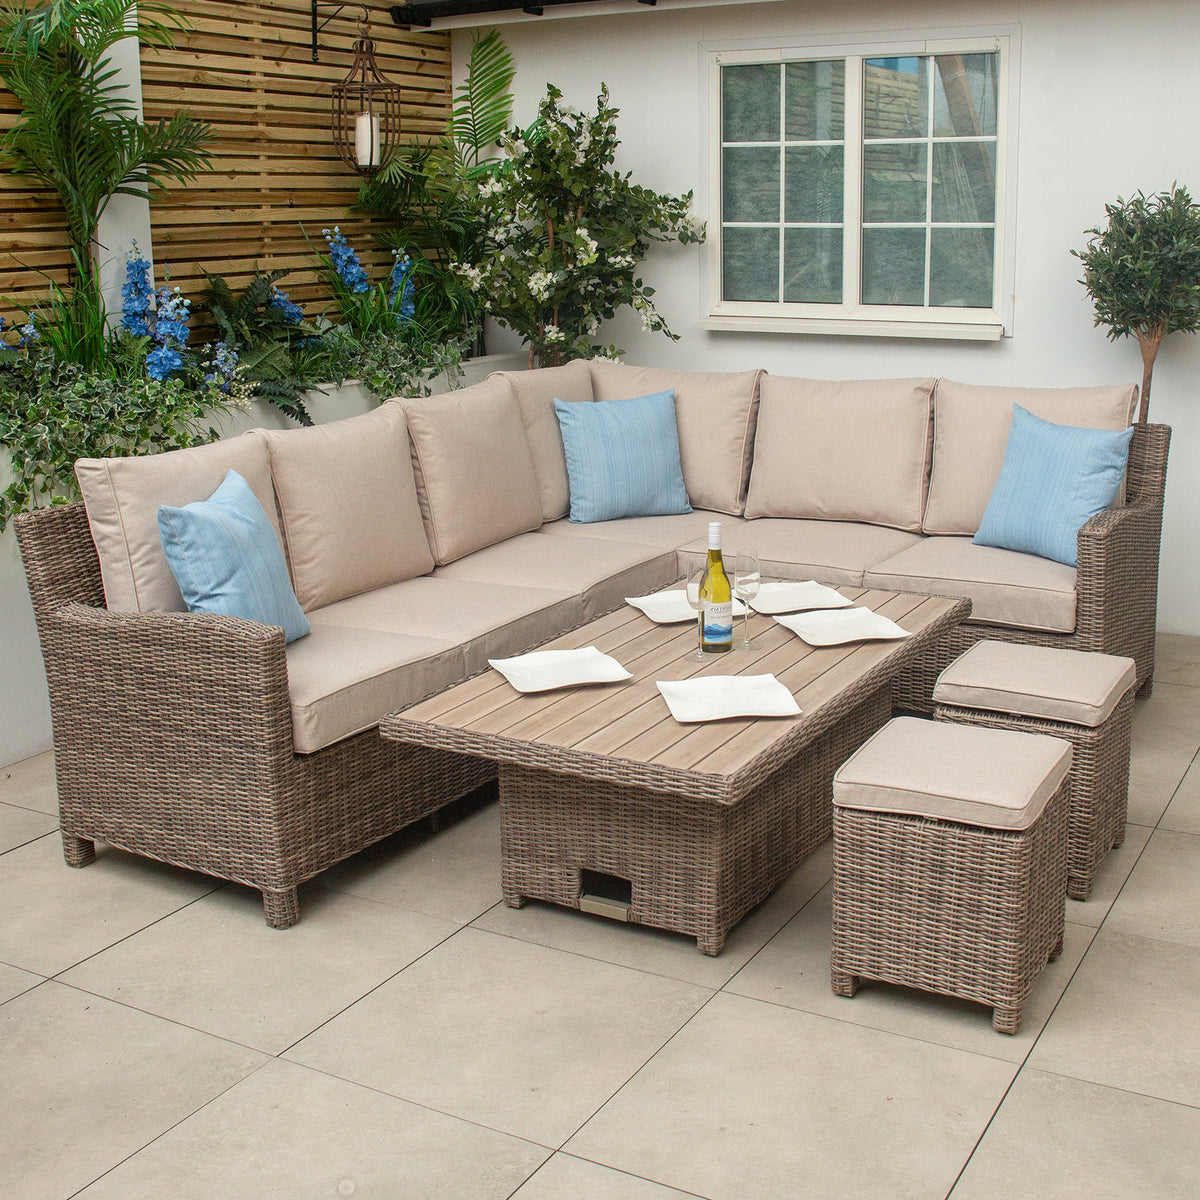 Kettler Palma Signature Corner Left Hand Oyster Sofa Set with High Low Slat Top Table